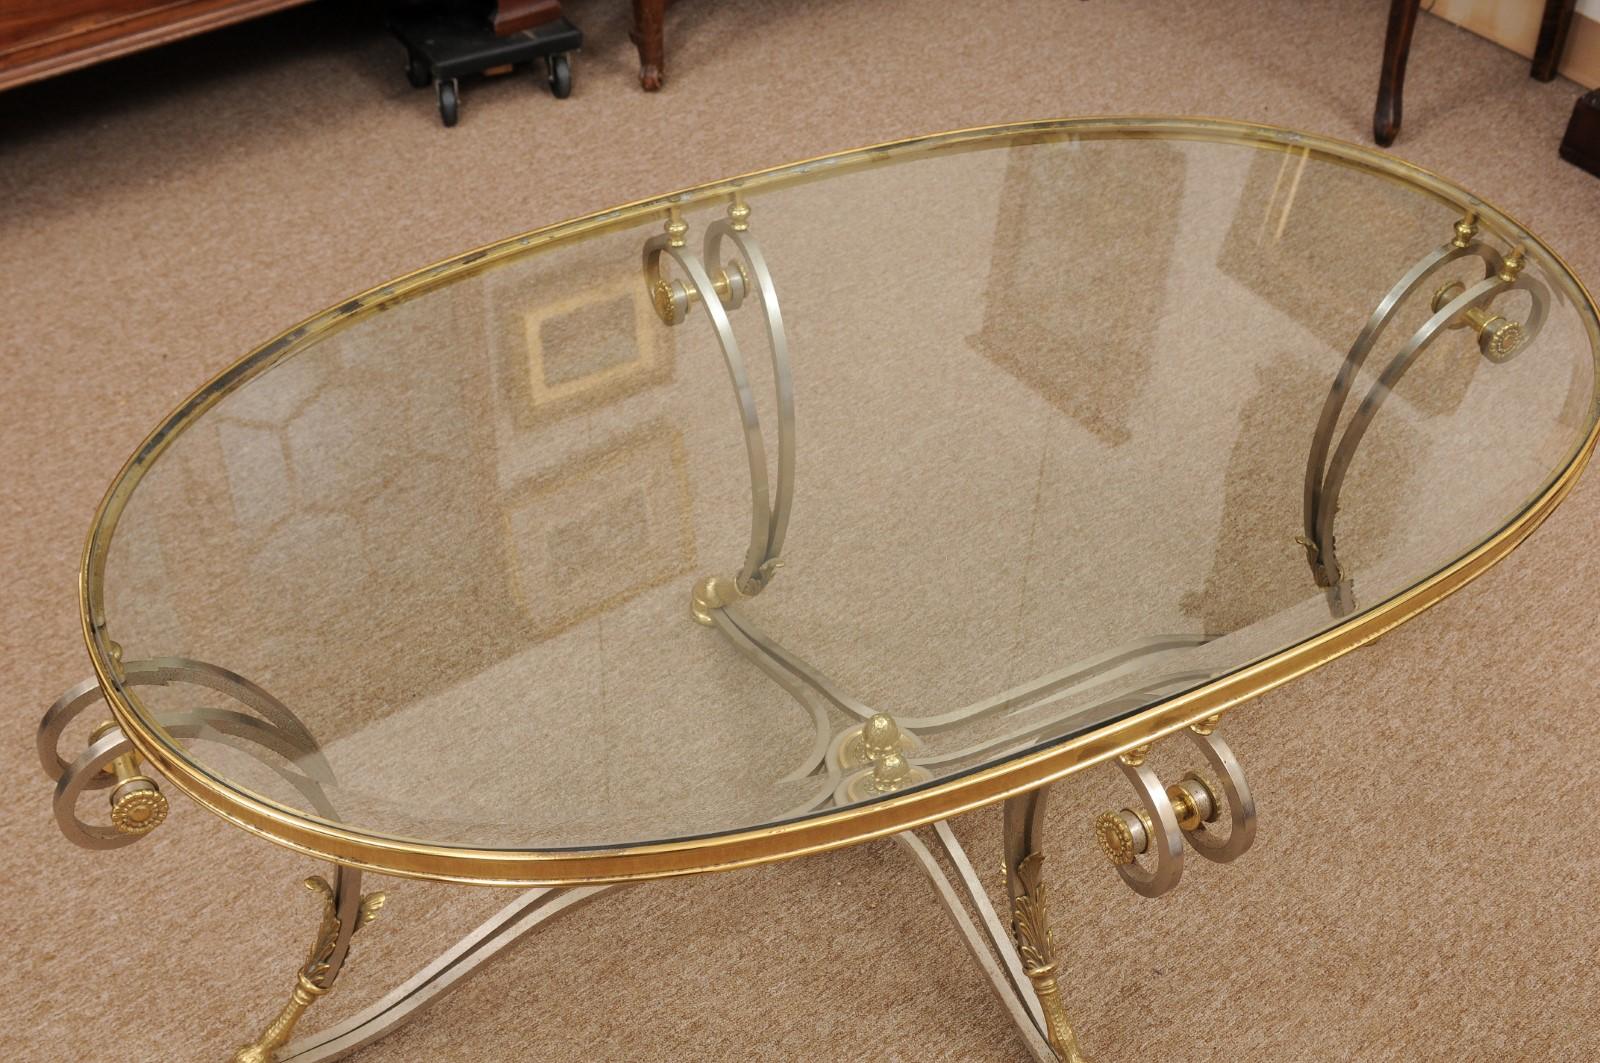 20th Century Oval French Steel & Brass Coffee Table with Glass Top, Hoof Feet & Acorn Detail